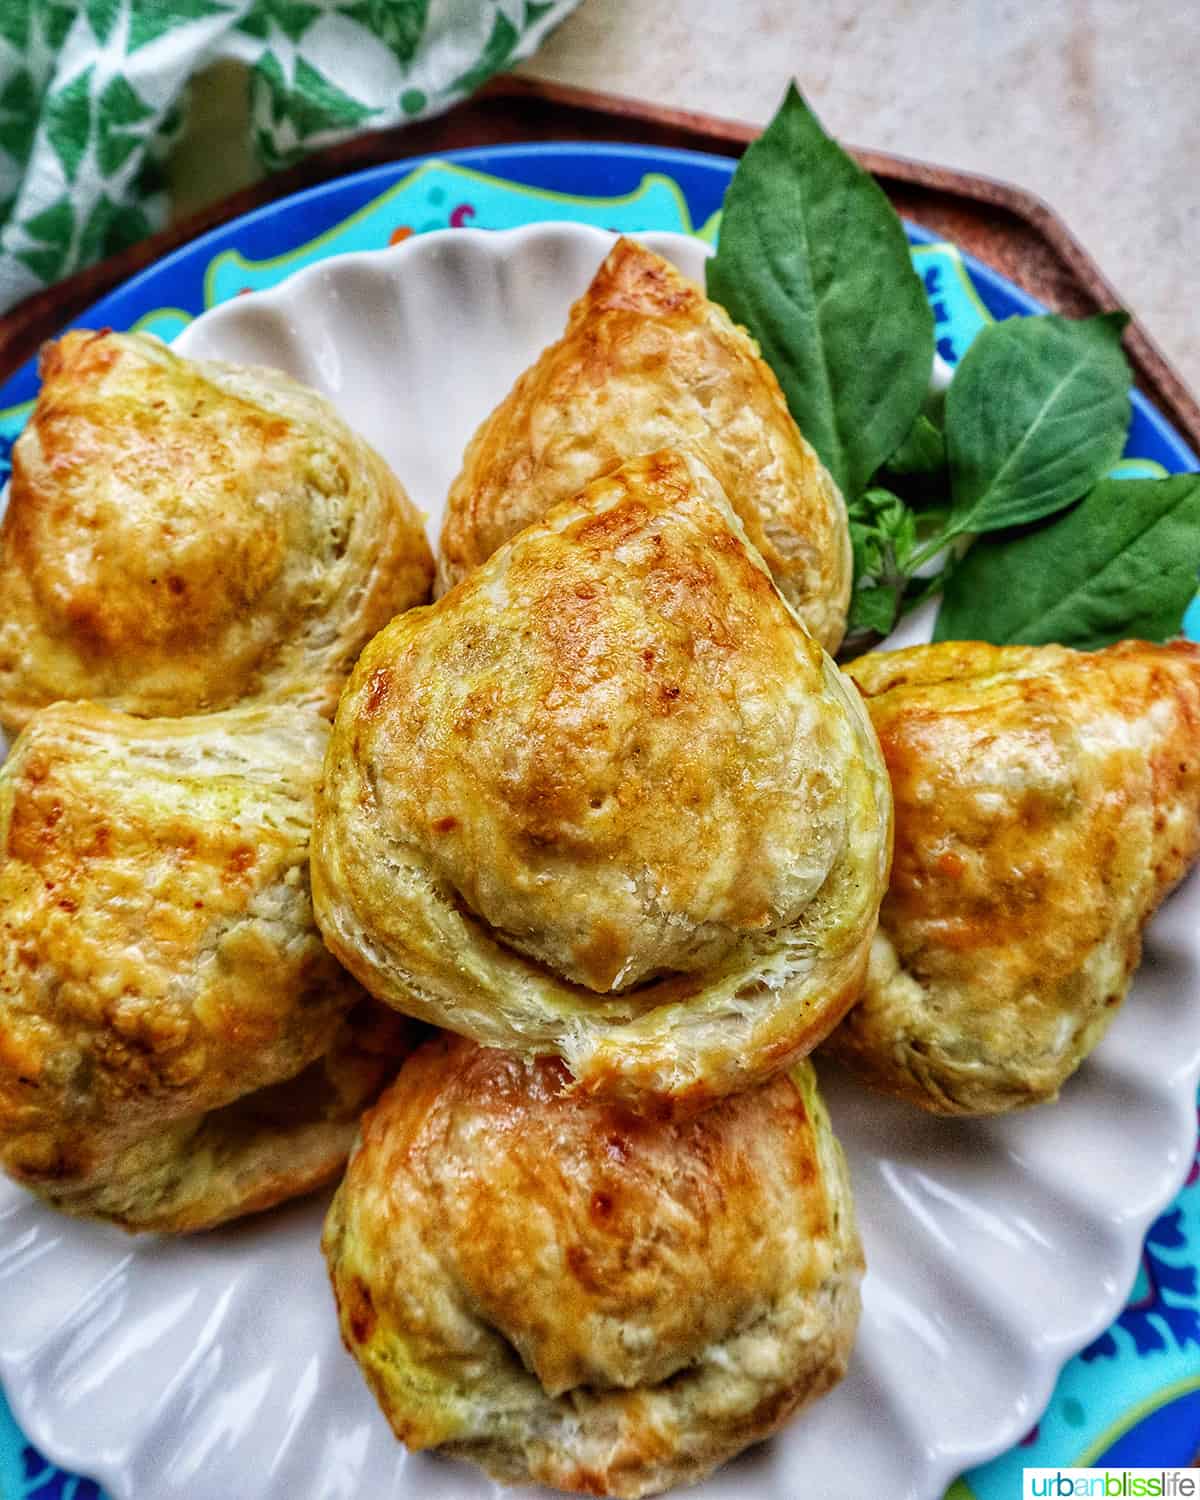 several baked Thai curry puff appetizers on a plate with side of Thai basil.